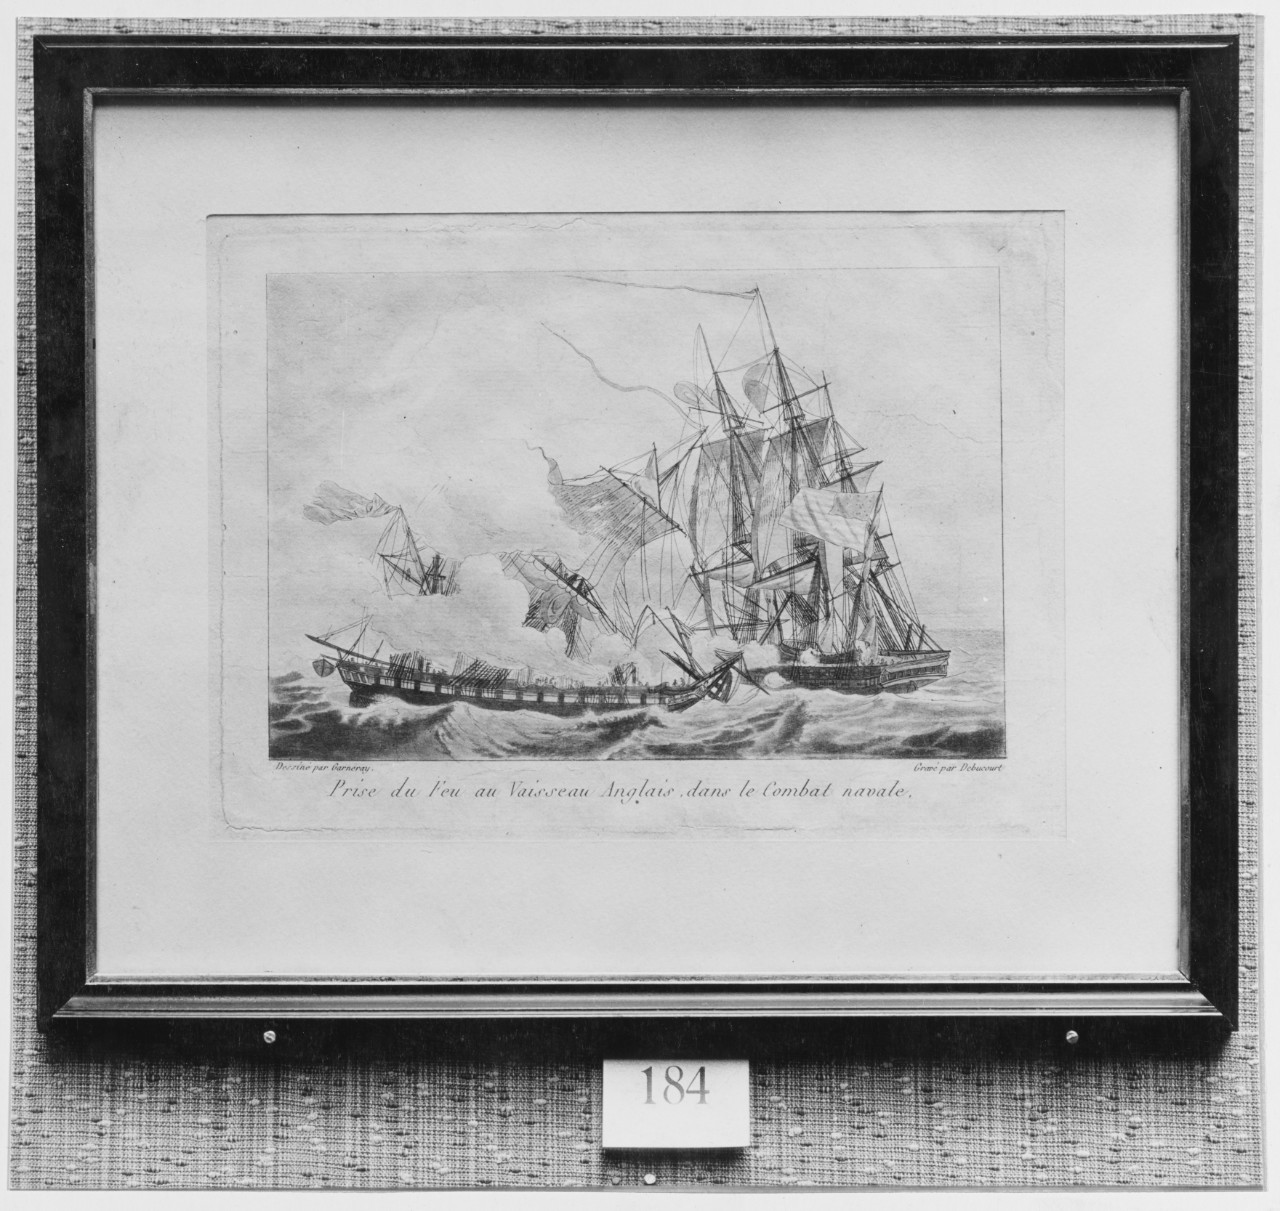 English ship catching fire during an engagement with an American vessel